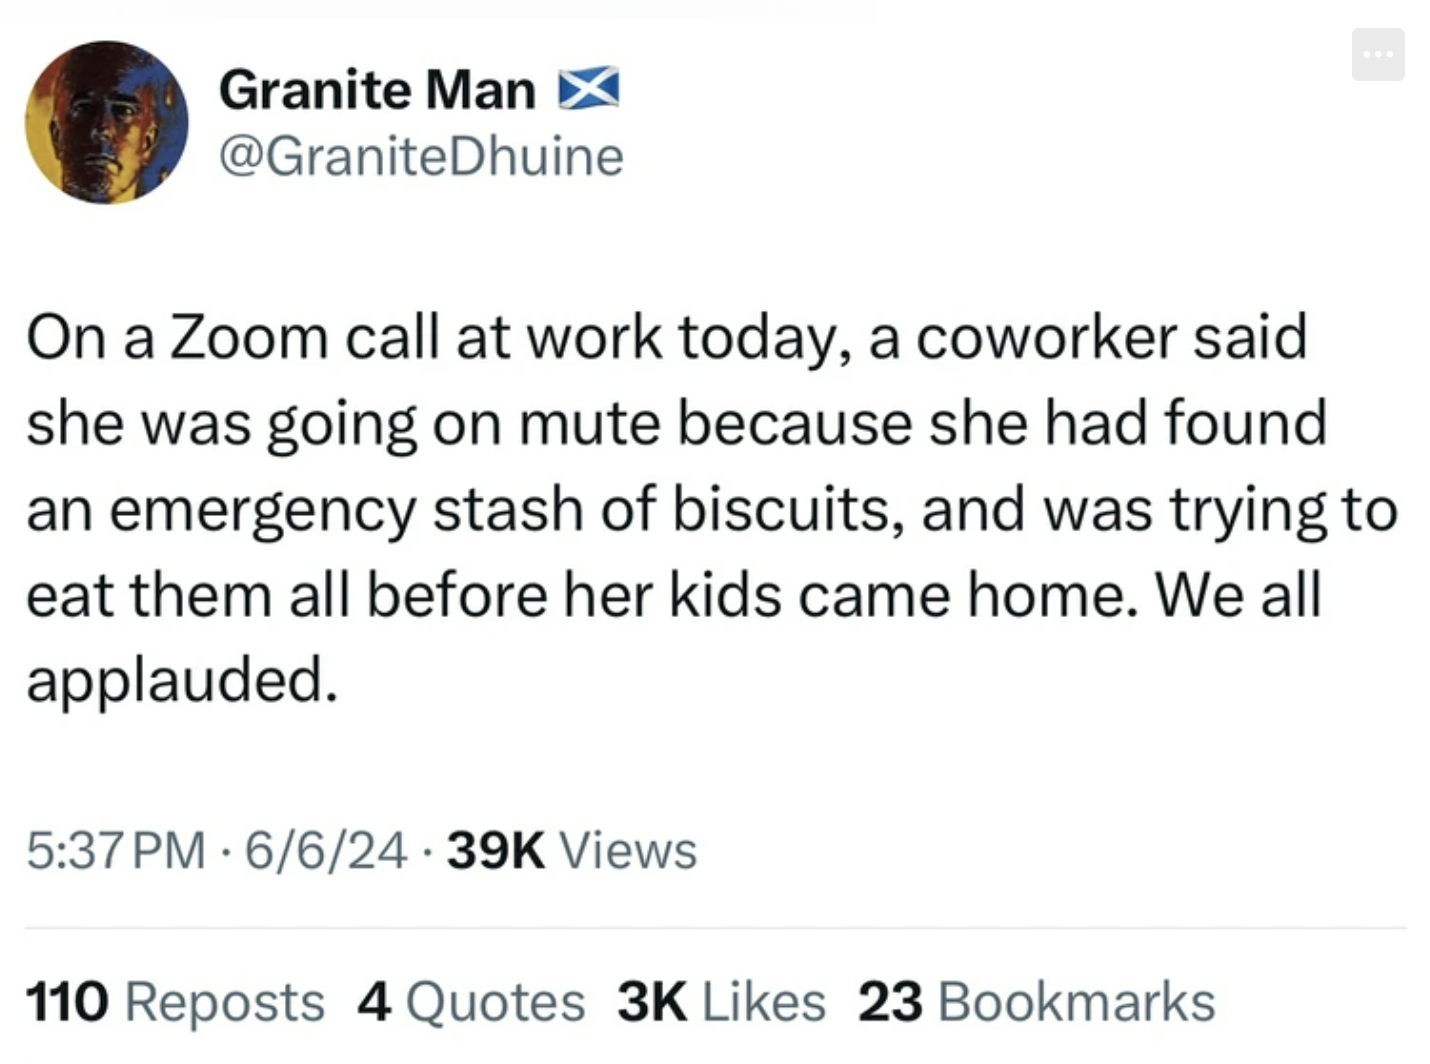 screenshot - Granite Man On a Zoom call at work today, a coworker said she was going on mute because she had found an emergency stash of biscuits, and was trying to eat them all before her kids came home. We all applauded. 66 Views 110 Reposts 4 Quotes 3K